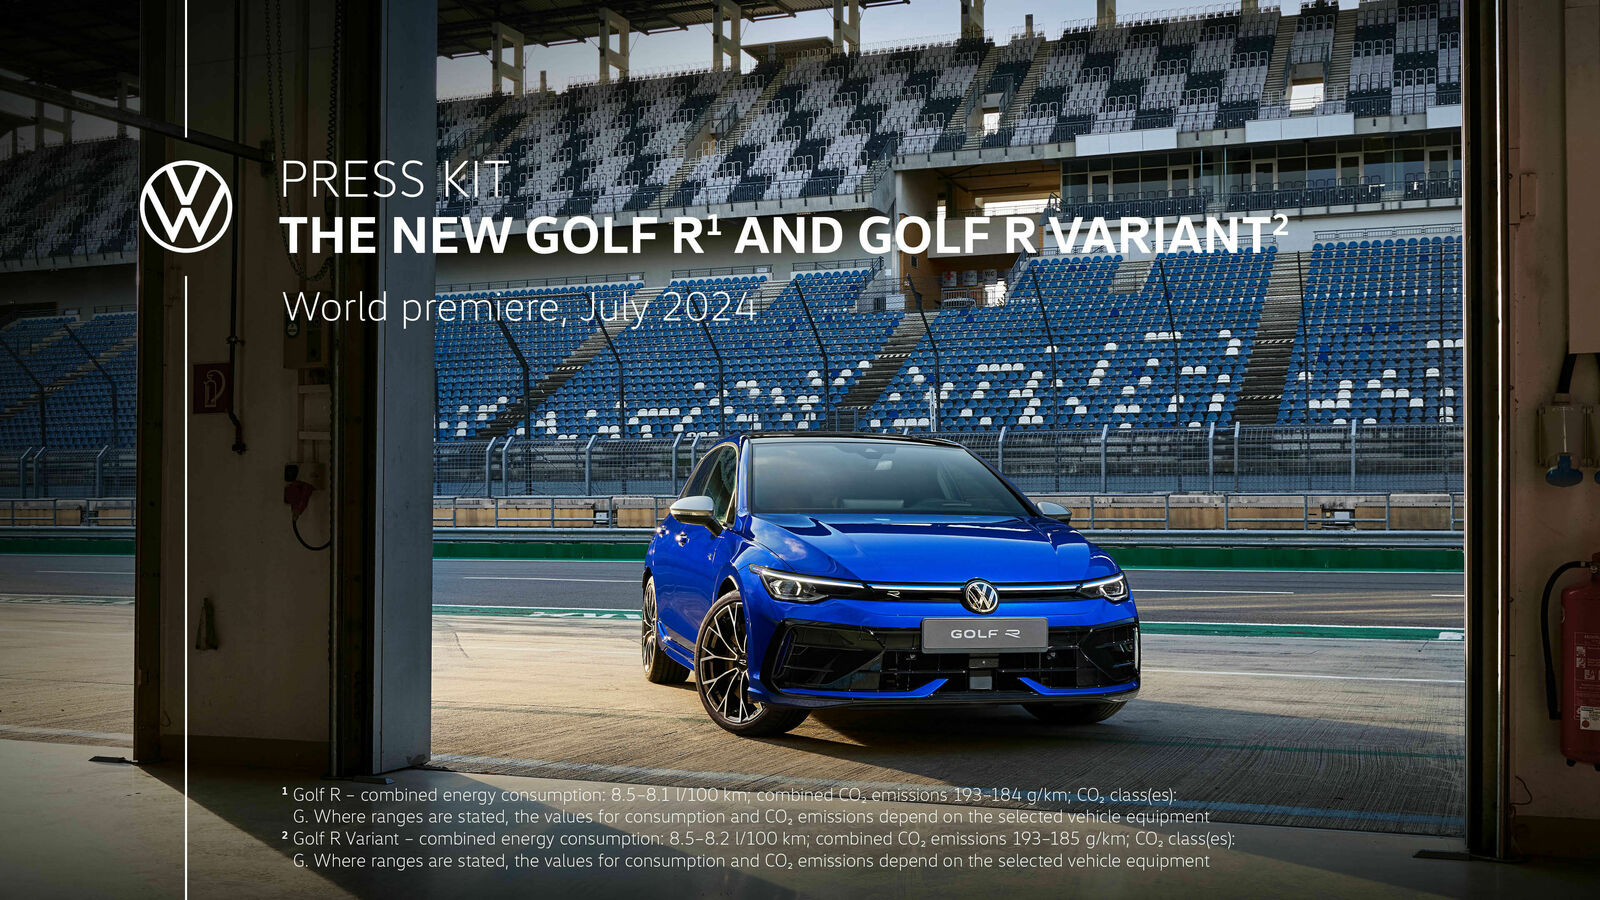 The new Golf R and Golf R Variant